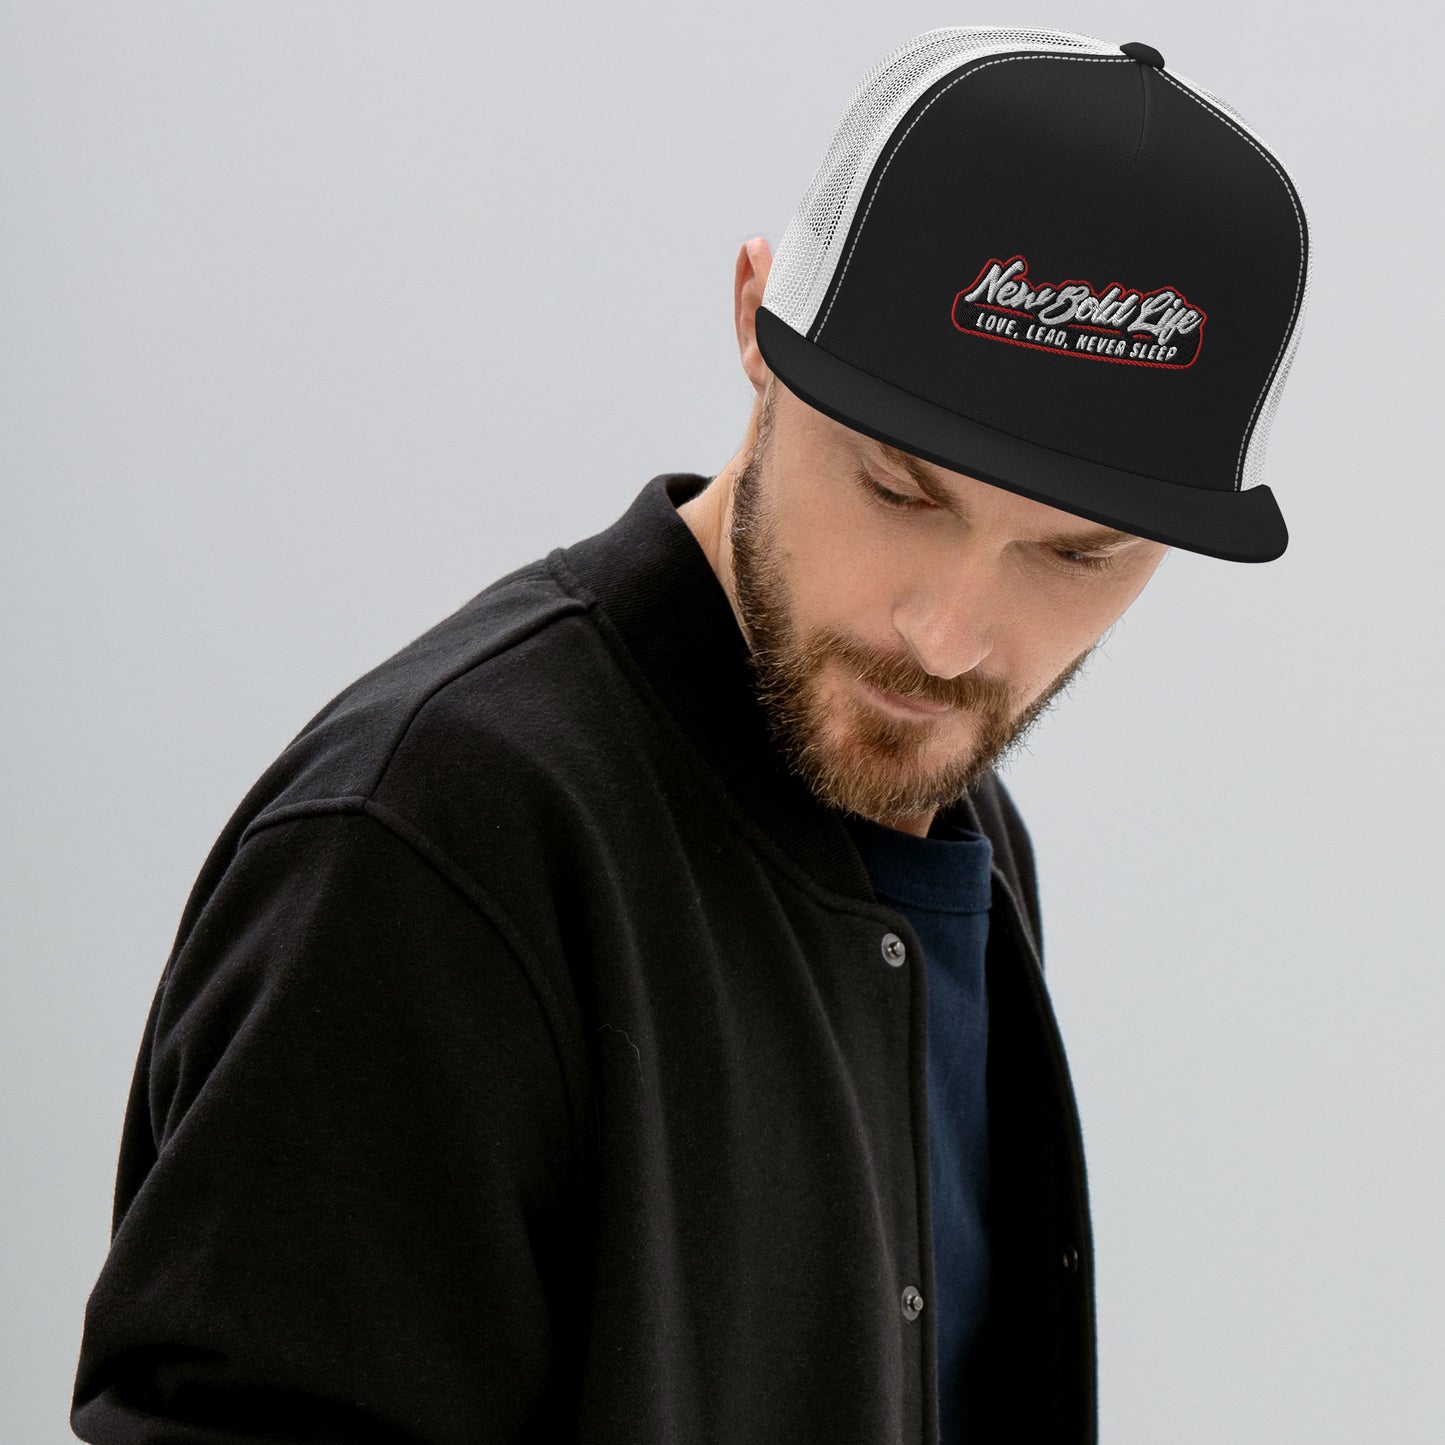 Image of model wearing New Bold Life Trucker Cap - Hats. The cap is black and white with the Newboldlife logo on the front.